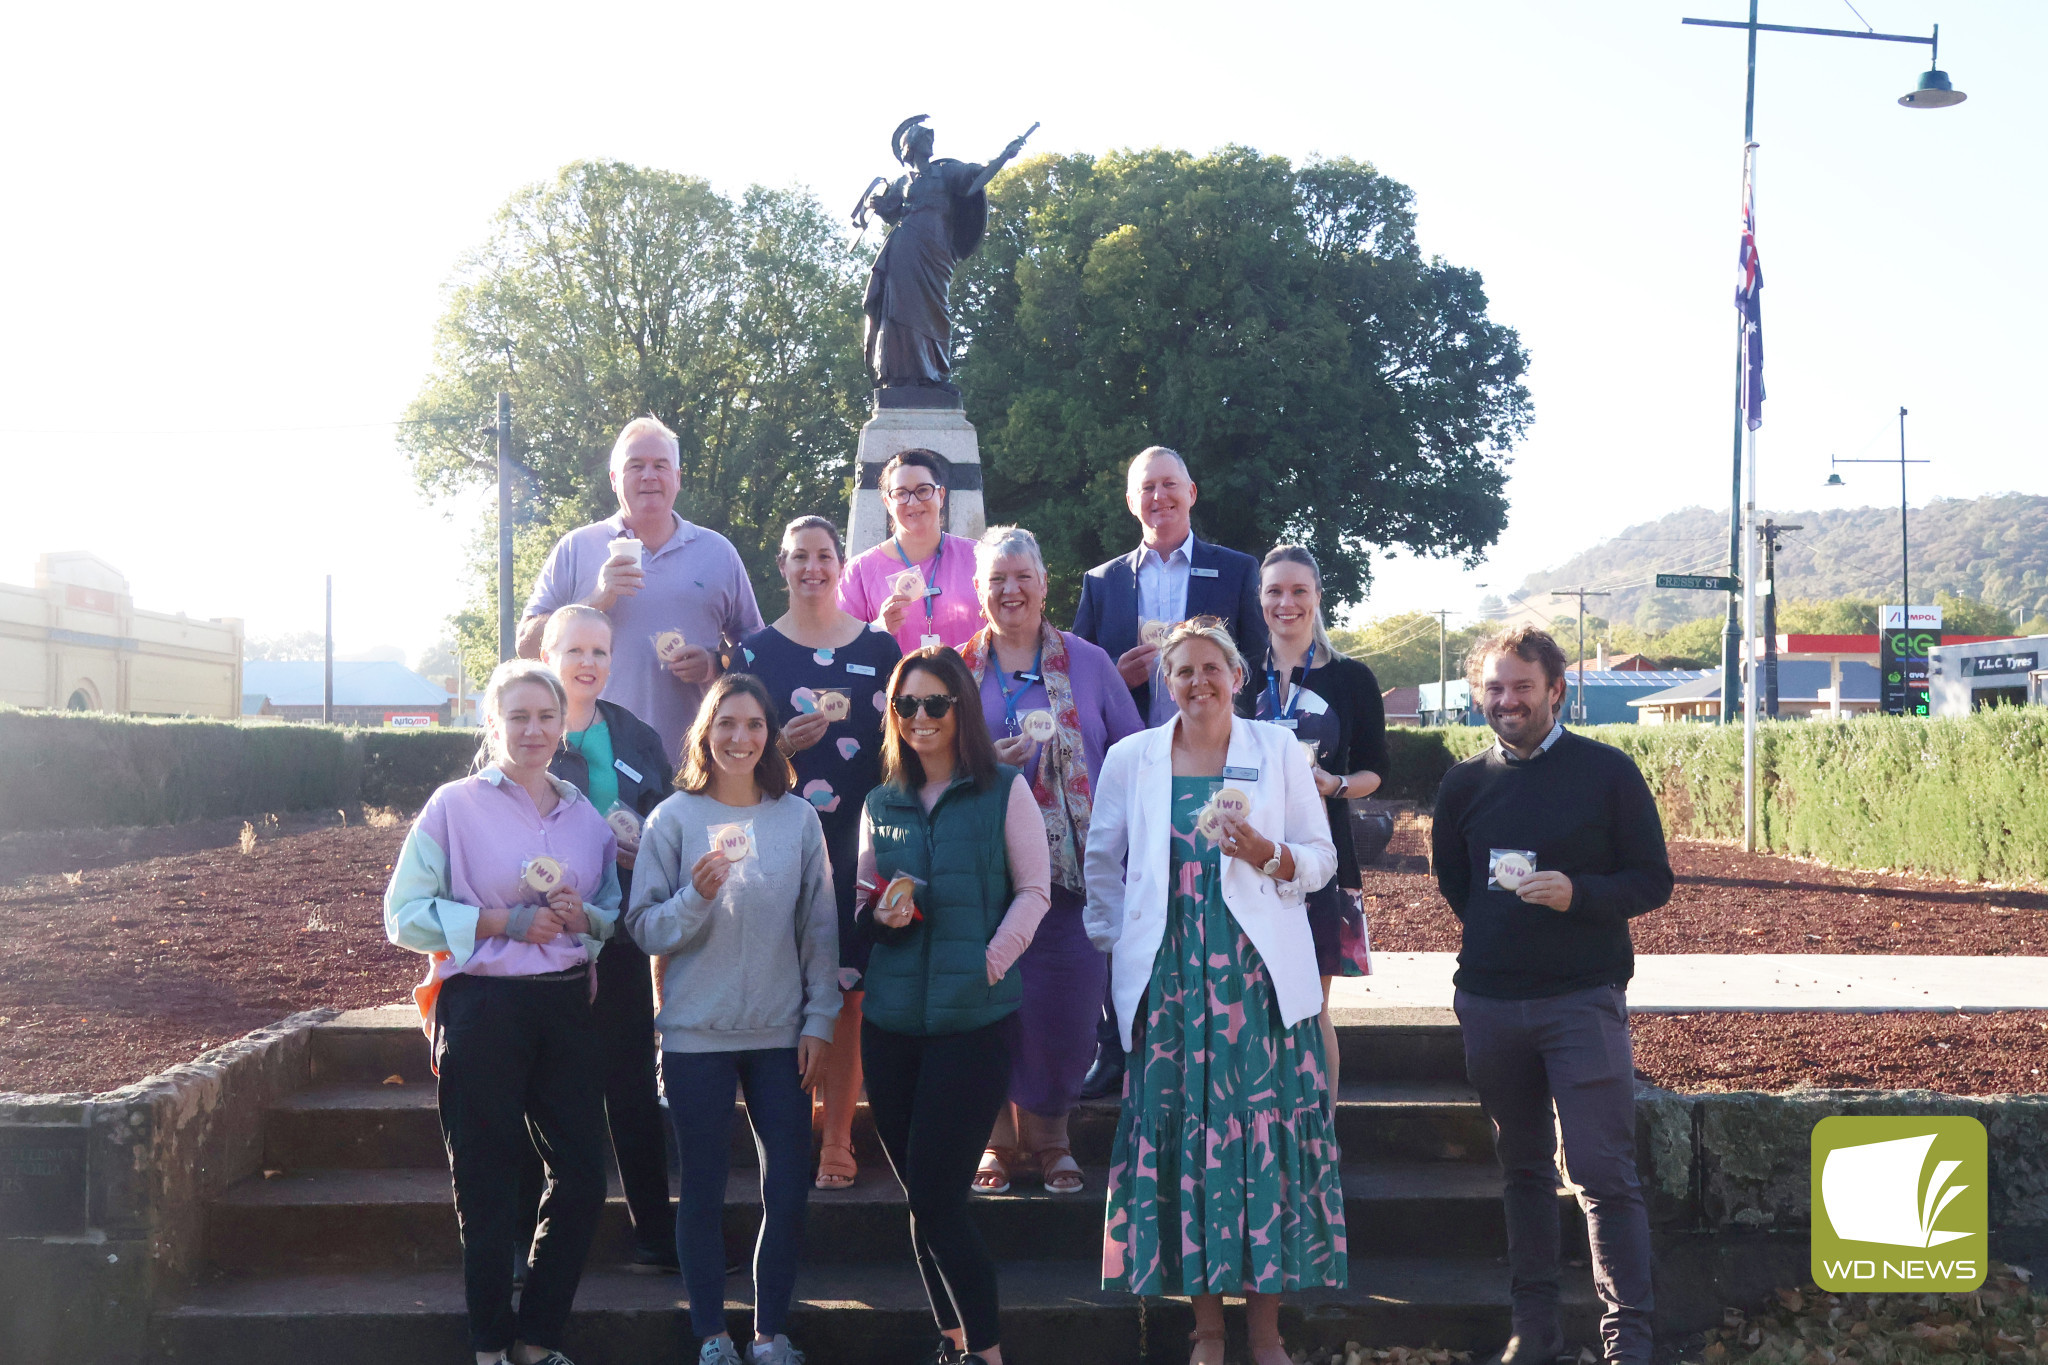 International Women’s Day: Council staff and residents came together and enjoyed a sweet treat under the Camperdown elms.